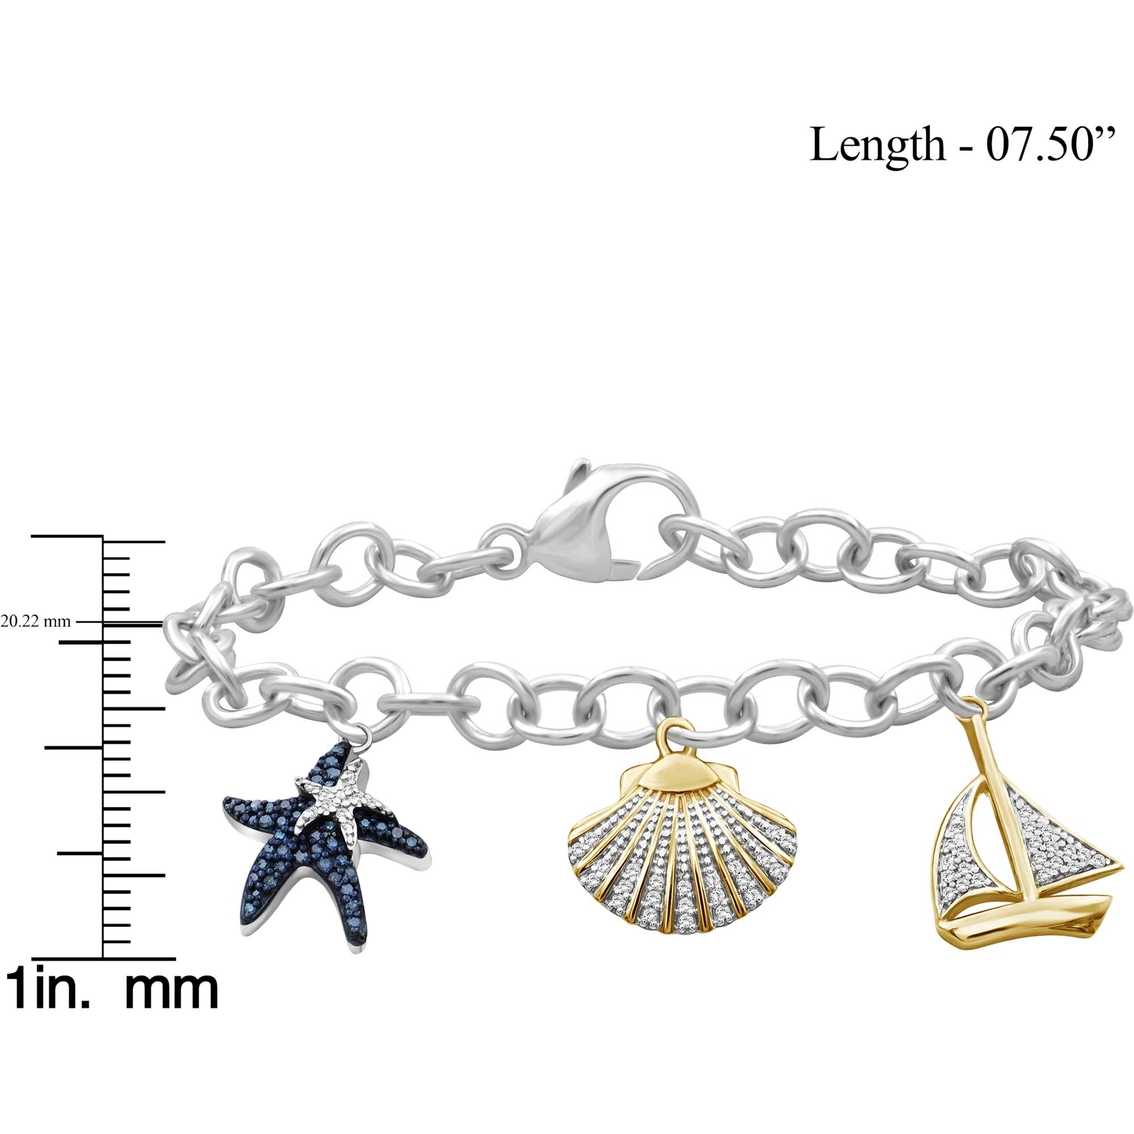 She Shines 14K Gold Over Sterling Silver 1/3 CTW Diamond Nautical Charm Bracelet - Image 2 of 4